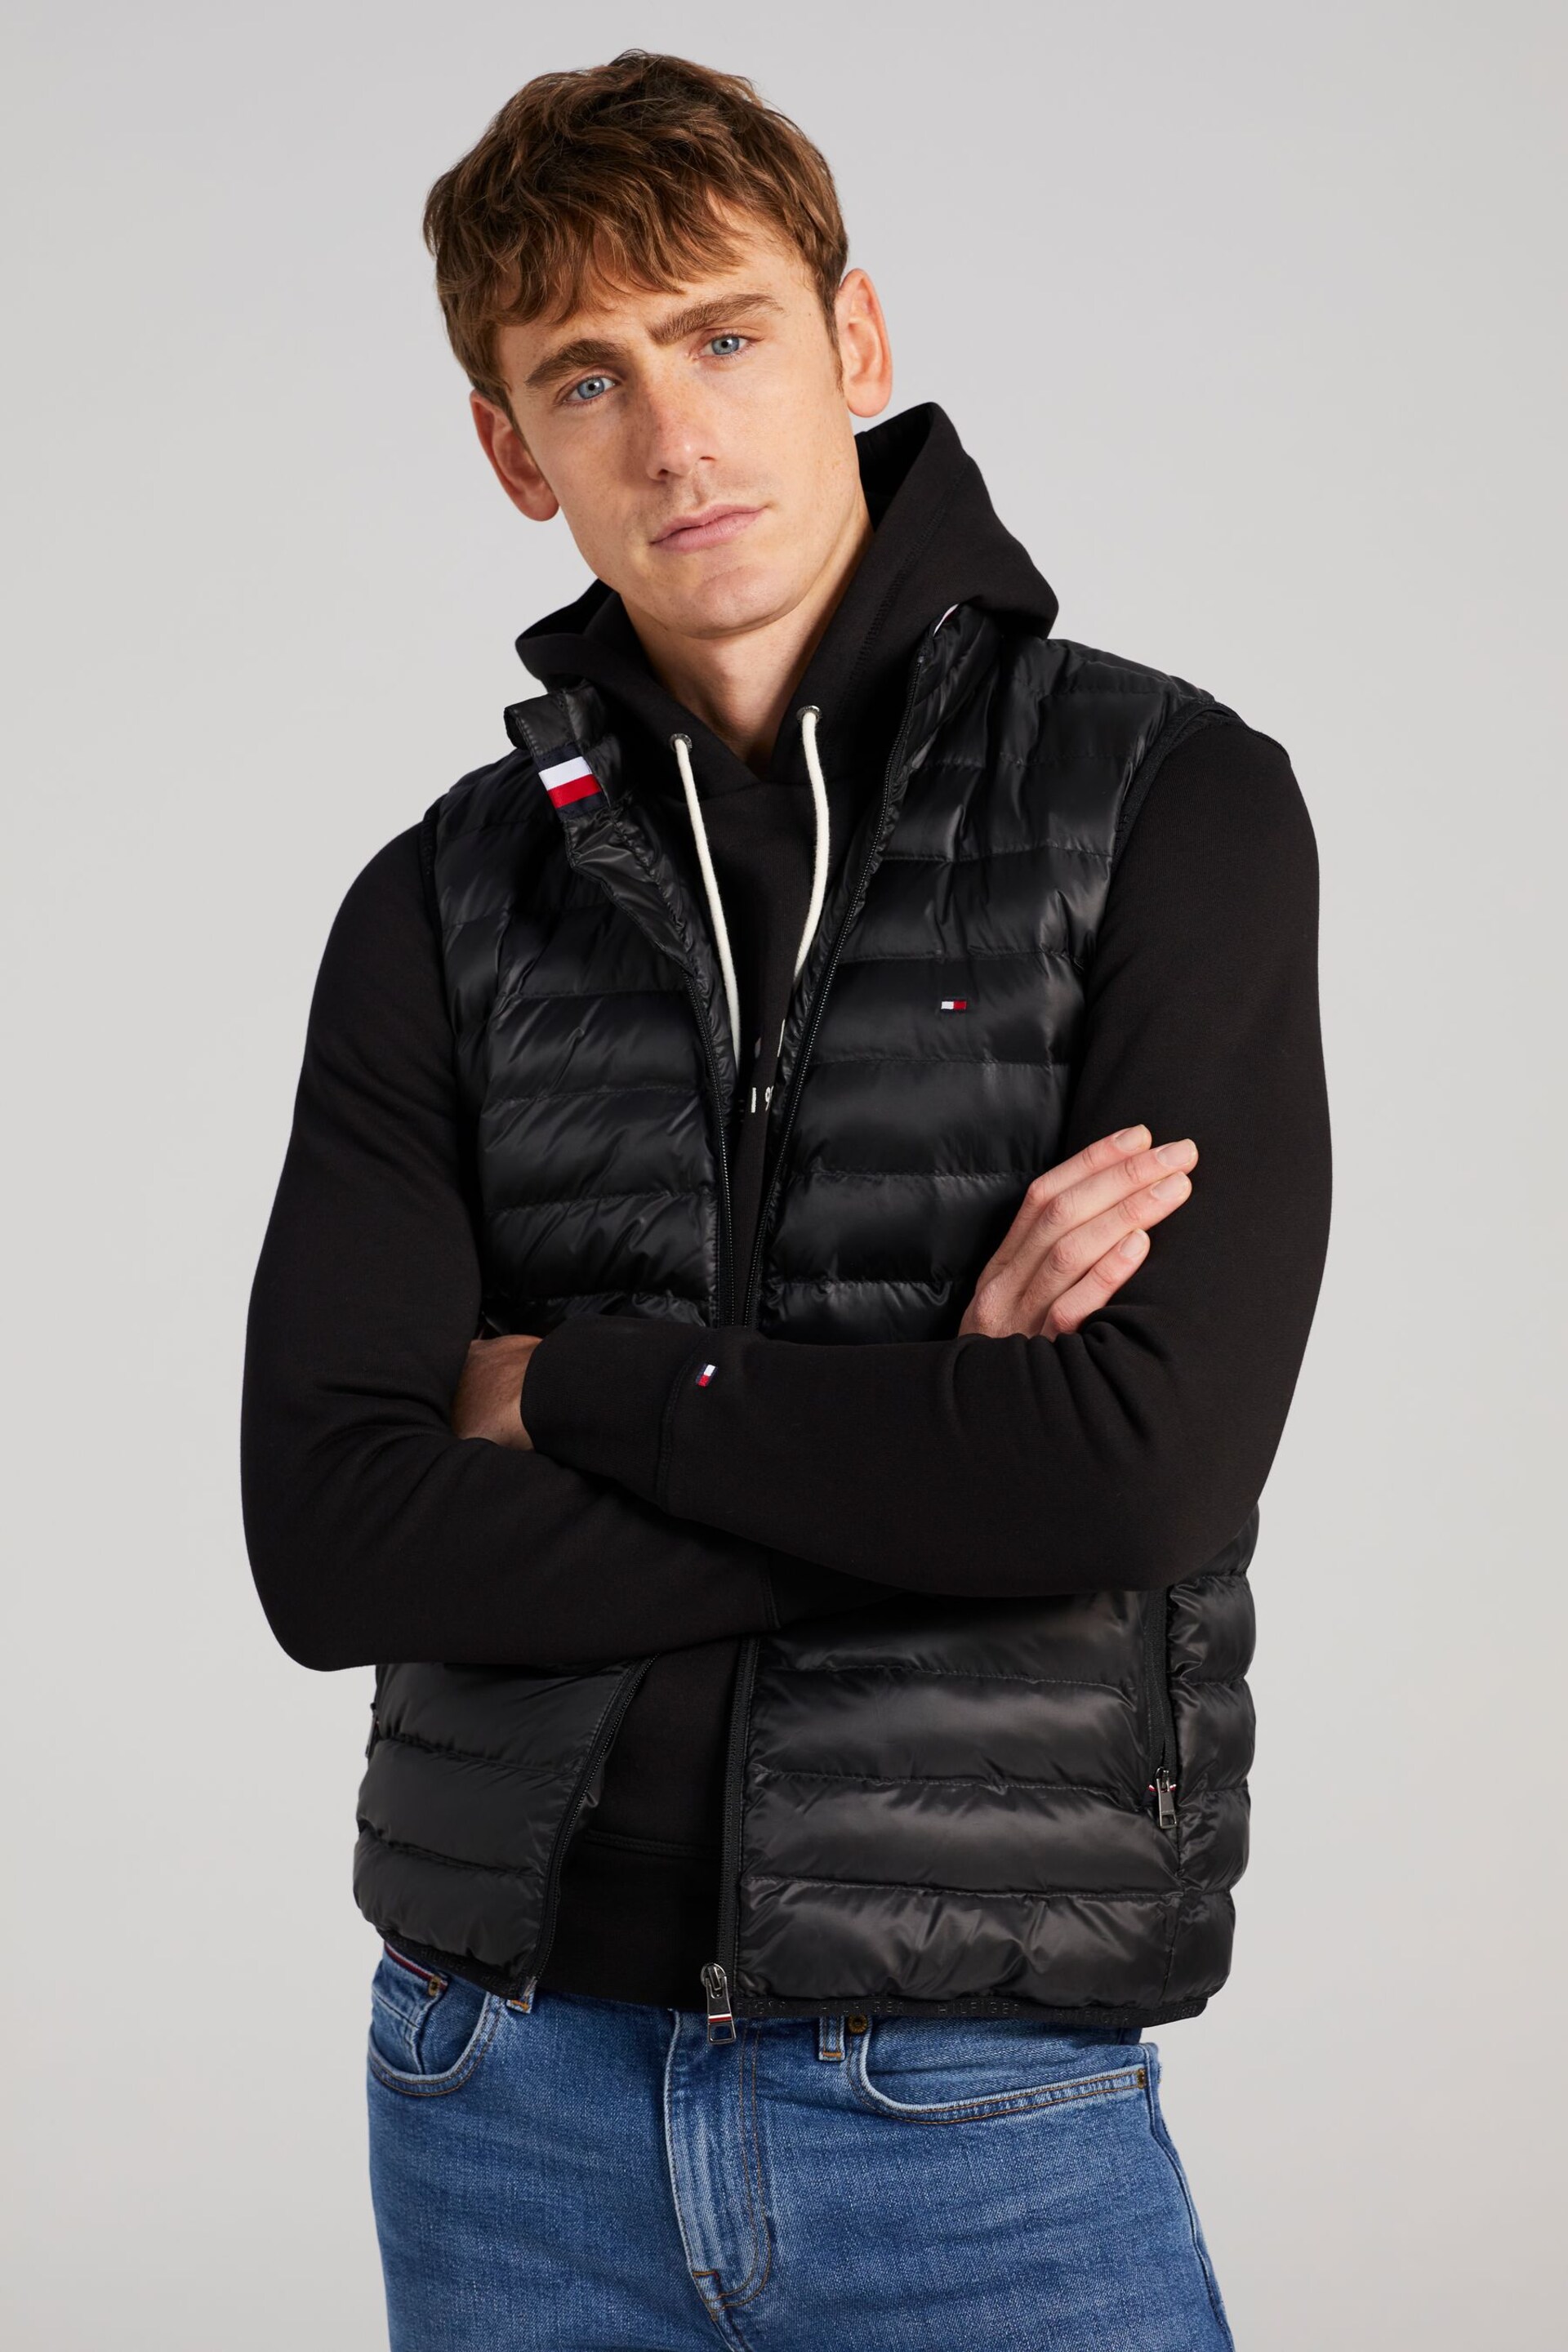 Tommy Hilfiger Core Packable Circular Vest - Image 1 of 5